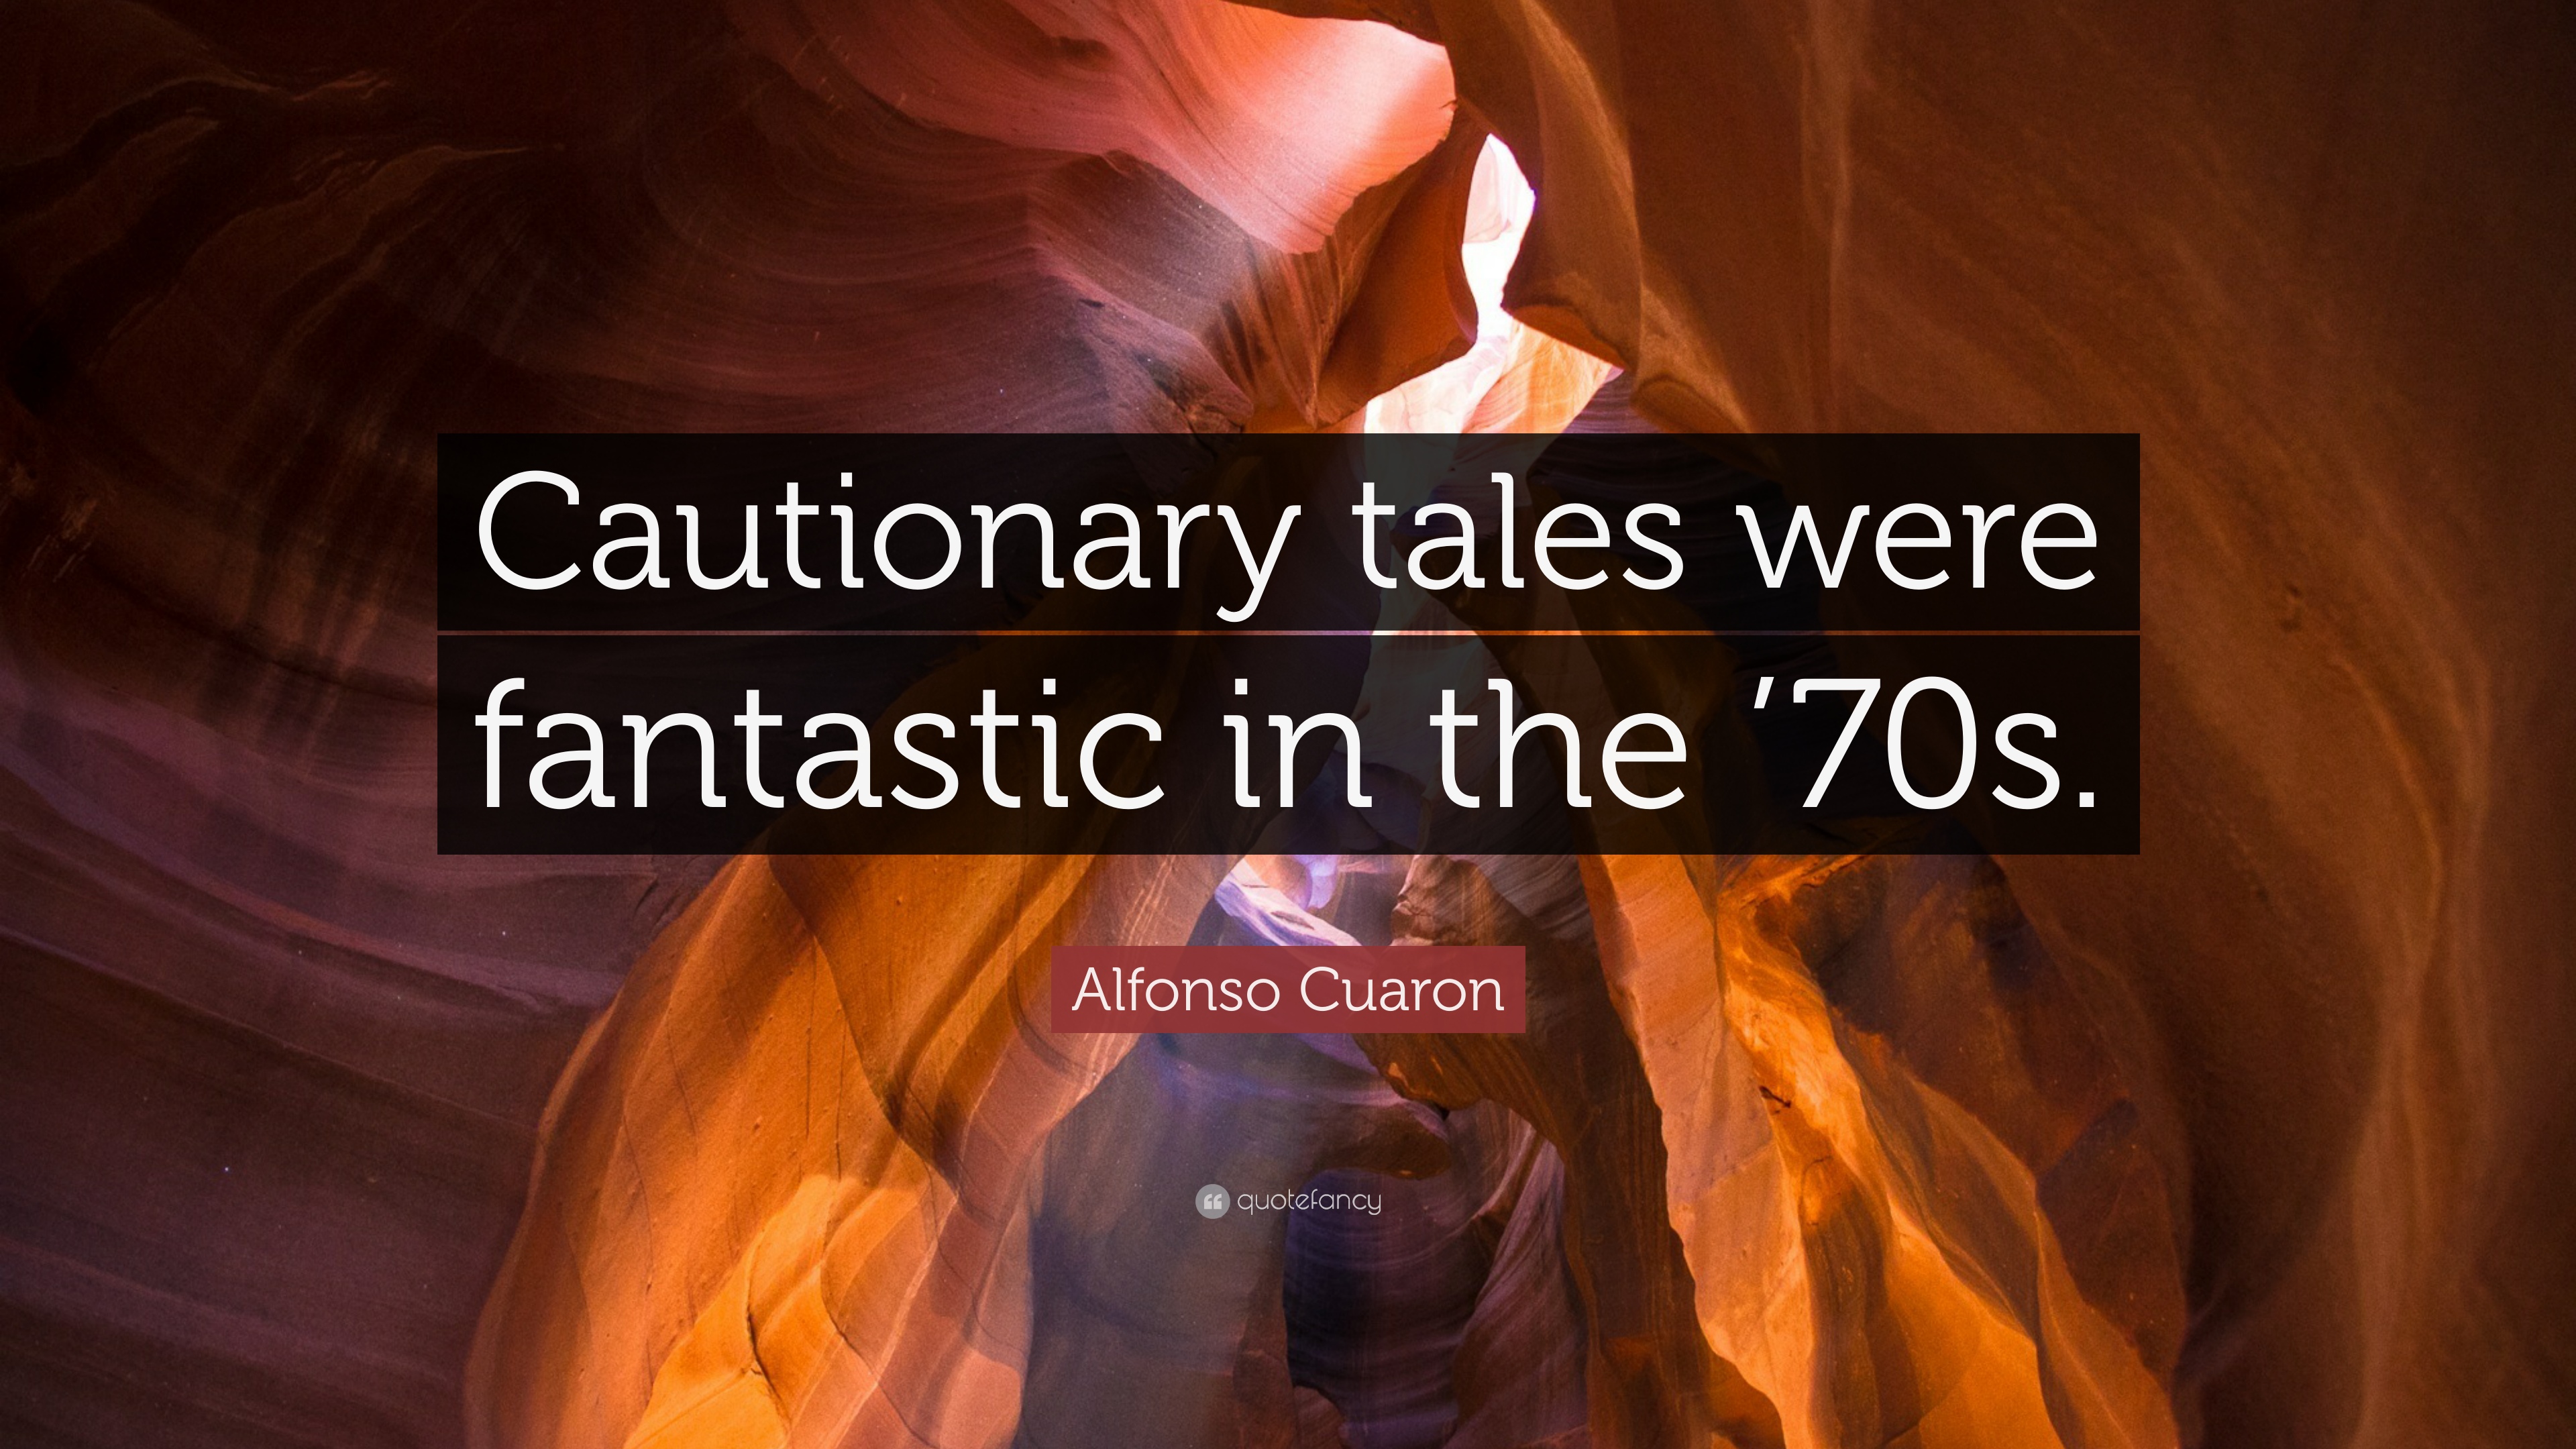 Alfonso Cuaron Quote: “Cautionary tales were fantastic in the '70s